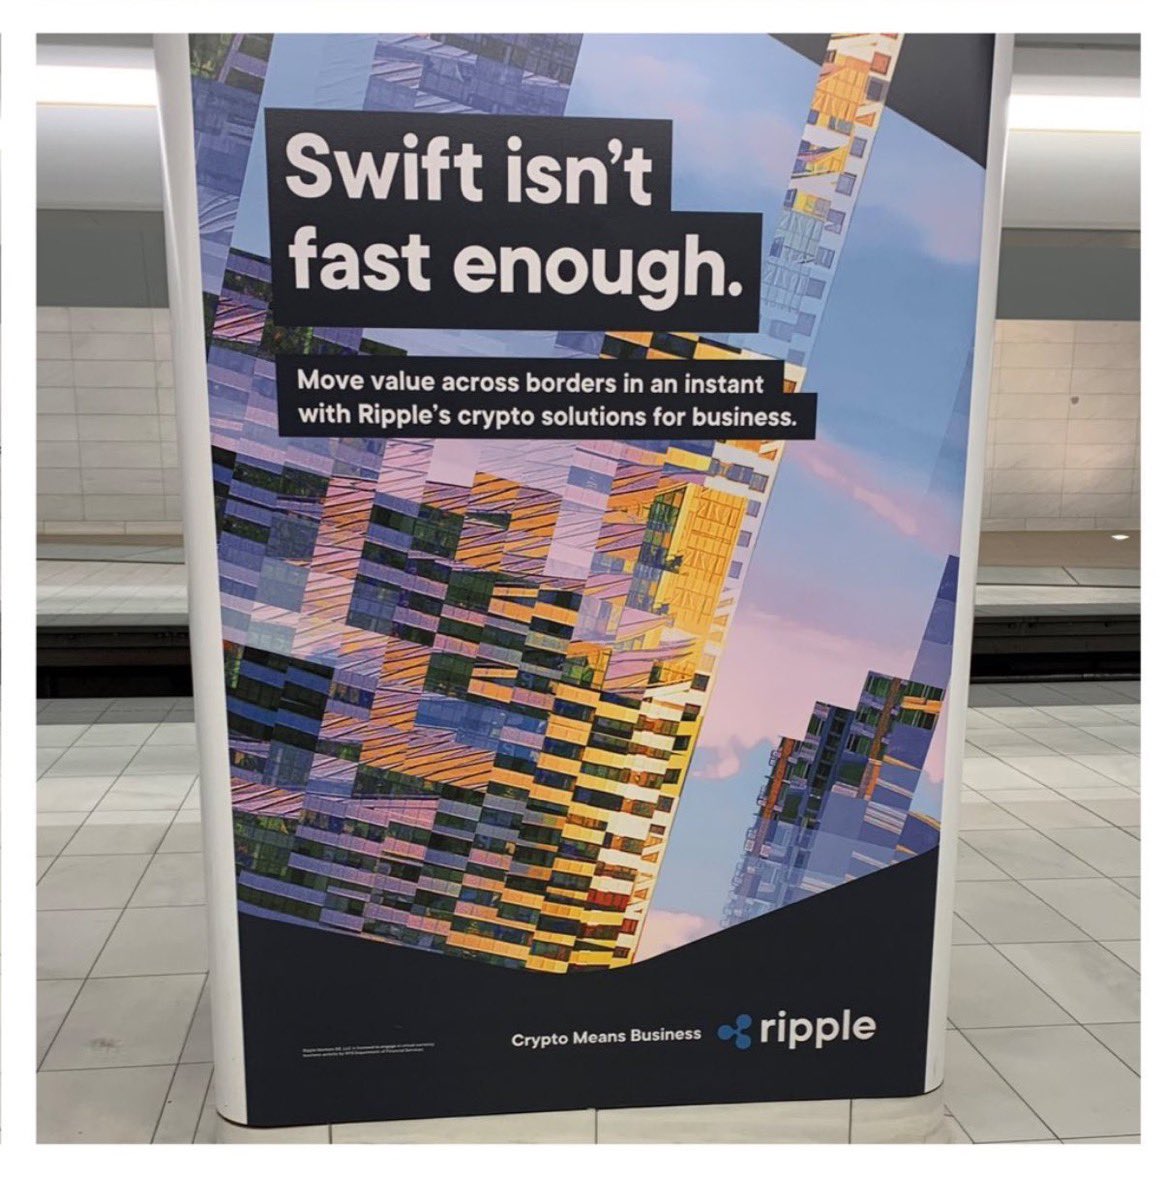 The @Ripple ad boldly declares: 'Forget #SWIFT, isn’t fast enough!' 💨

The $XRP Ledger outpaces the outdated #SWIFT system in speed and cost efficiency.